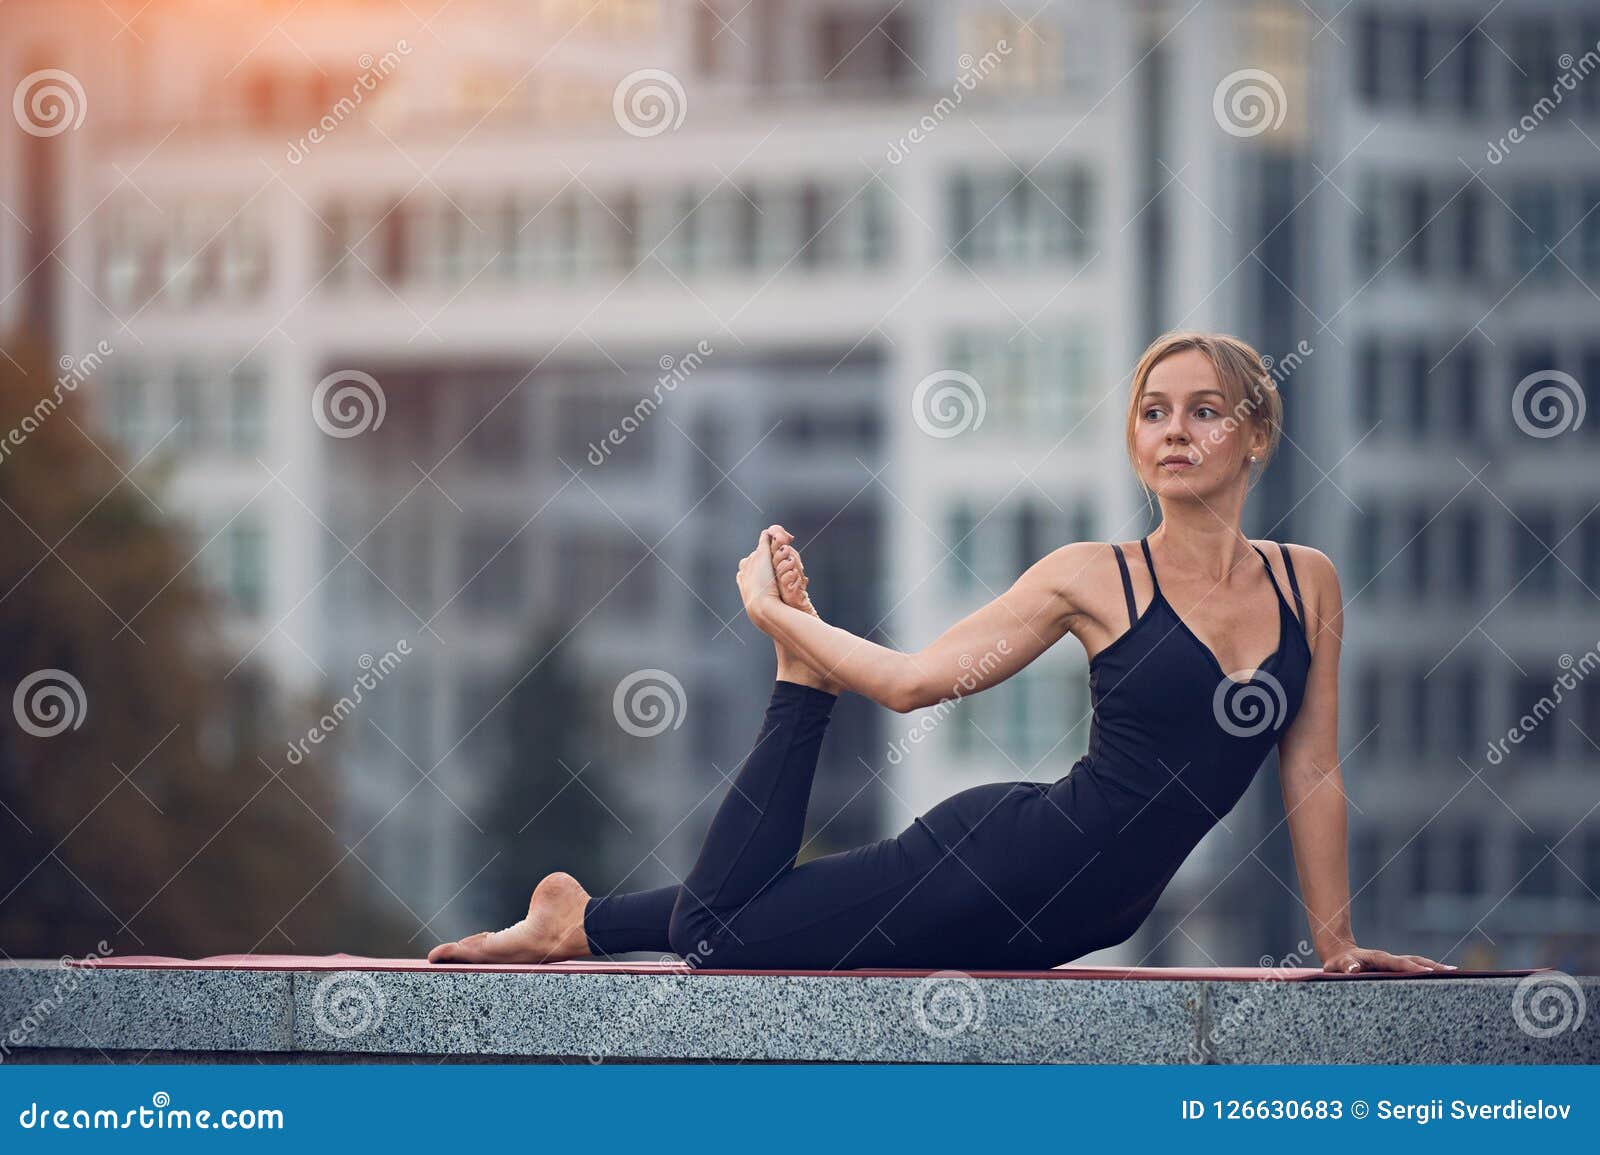 Half bow pose Cut Out Stock Images & Pictures - Alamy